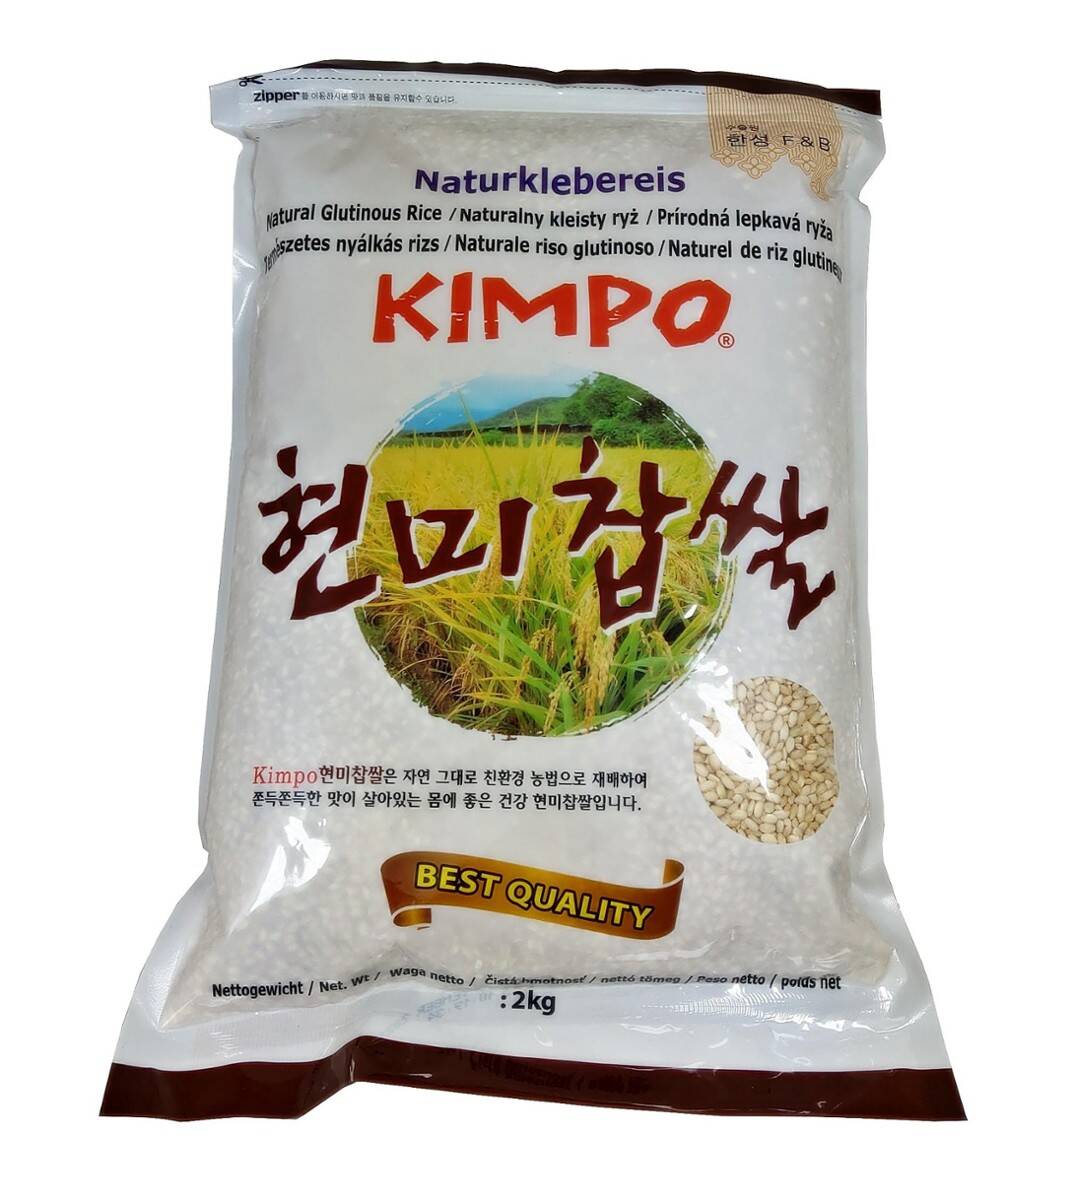 Kimpo rice sticky brown sweet (NK)2kg 현미찹쌀